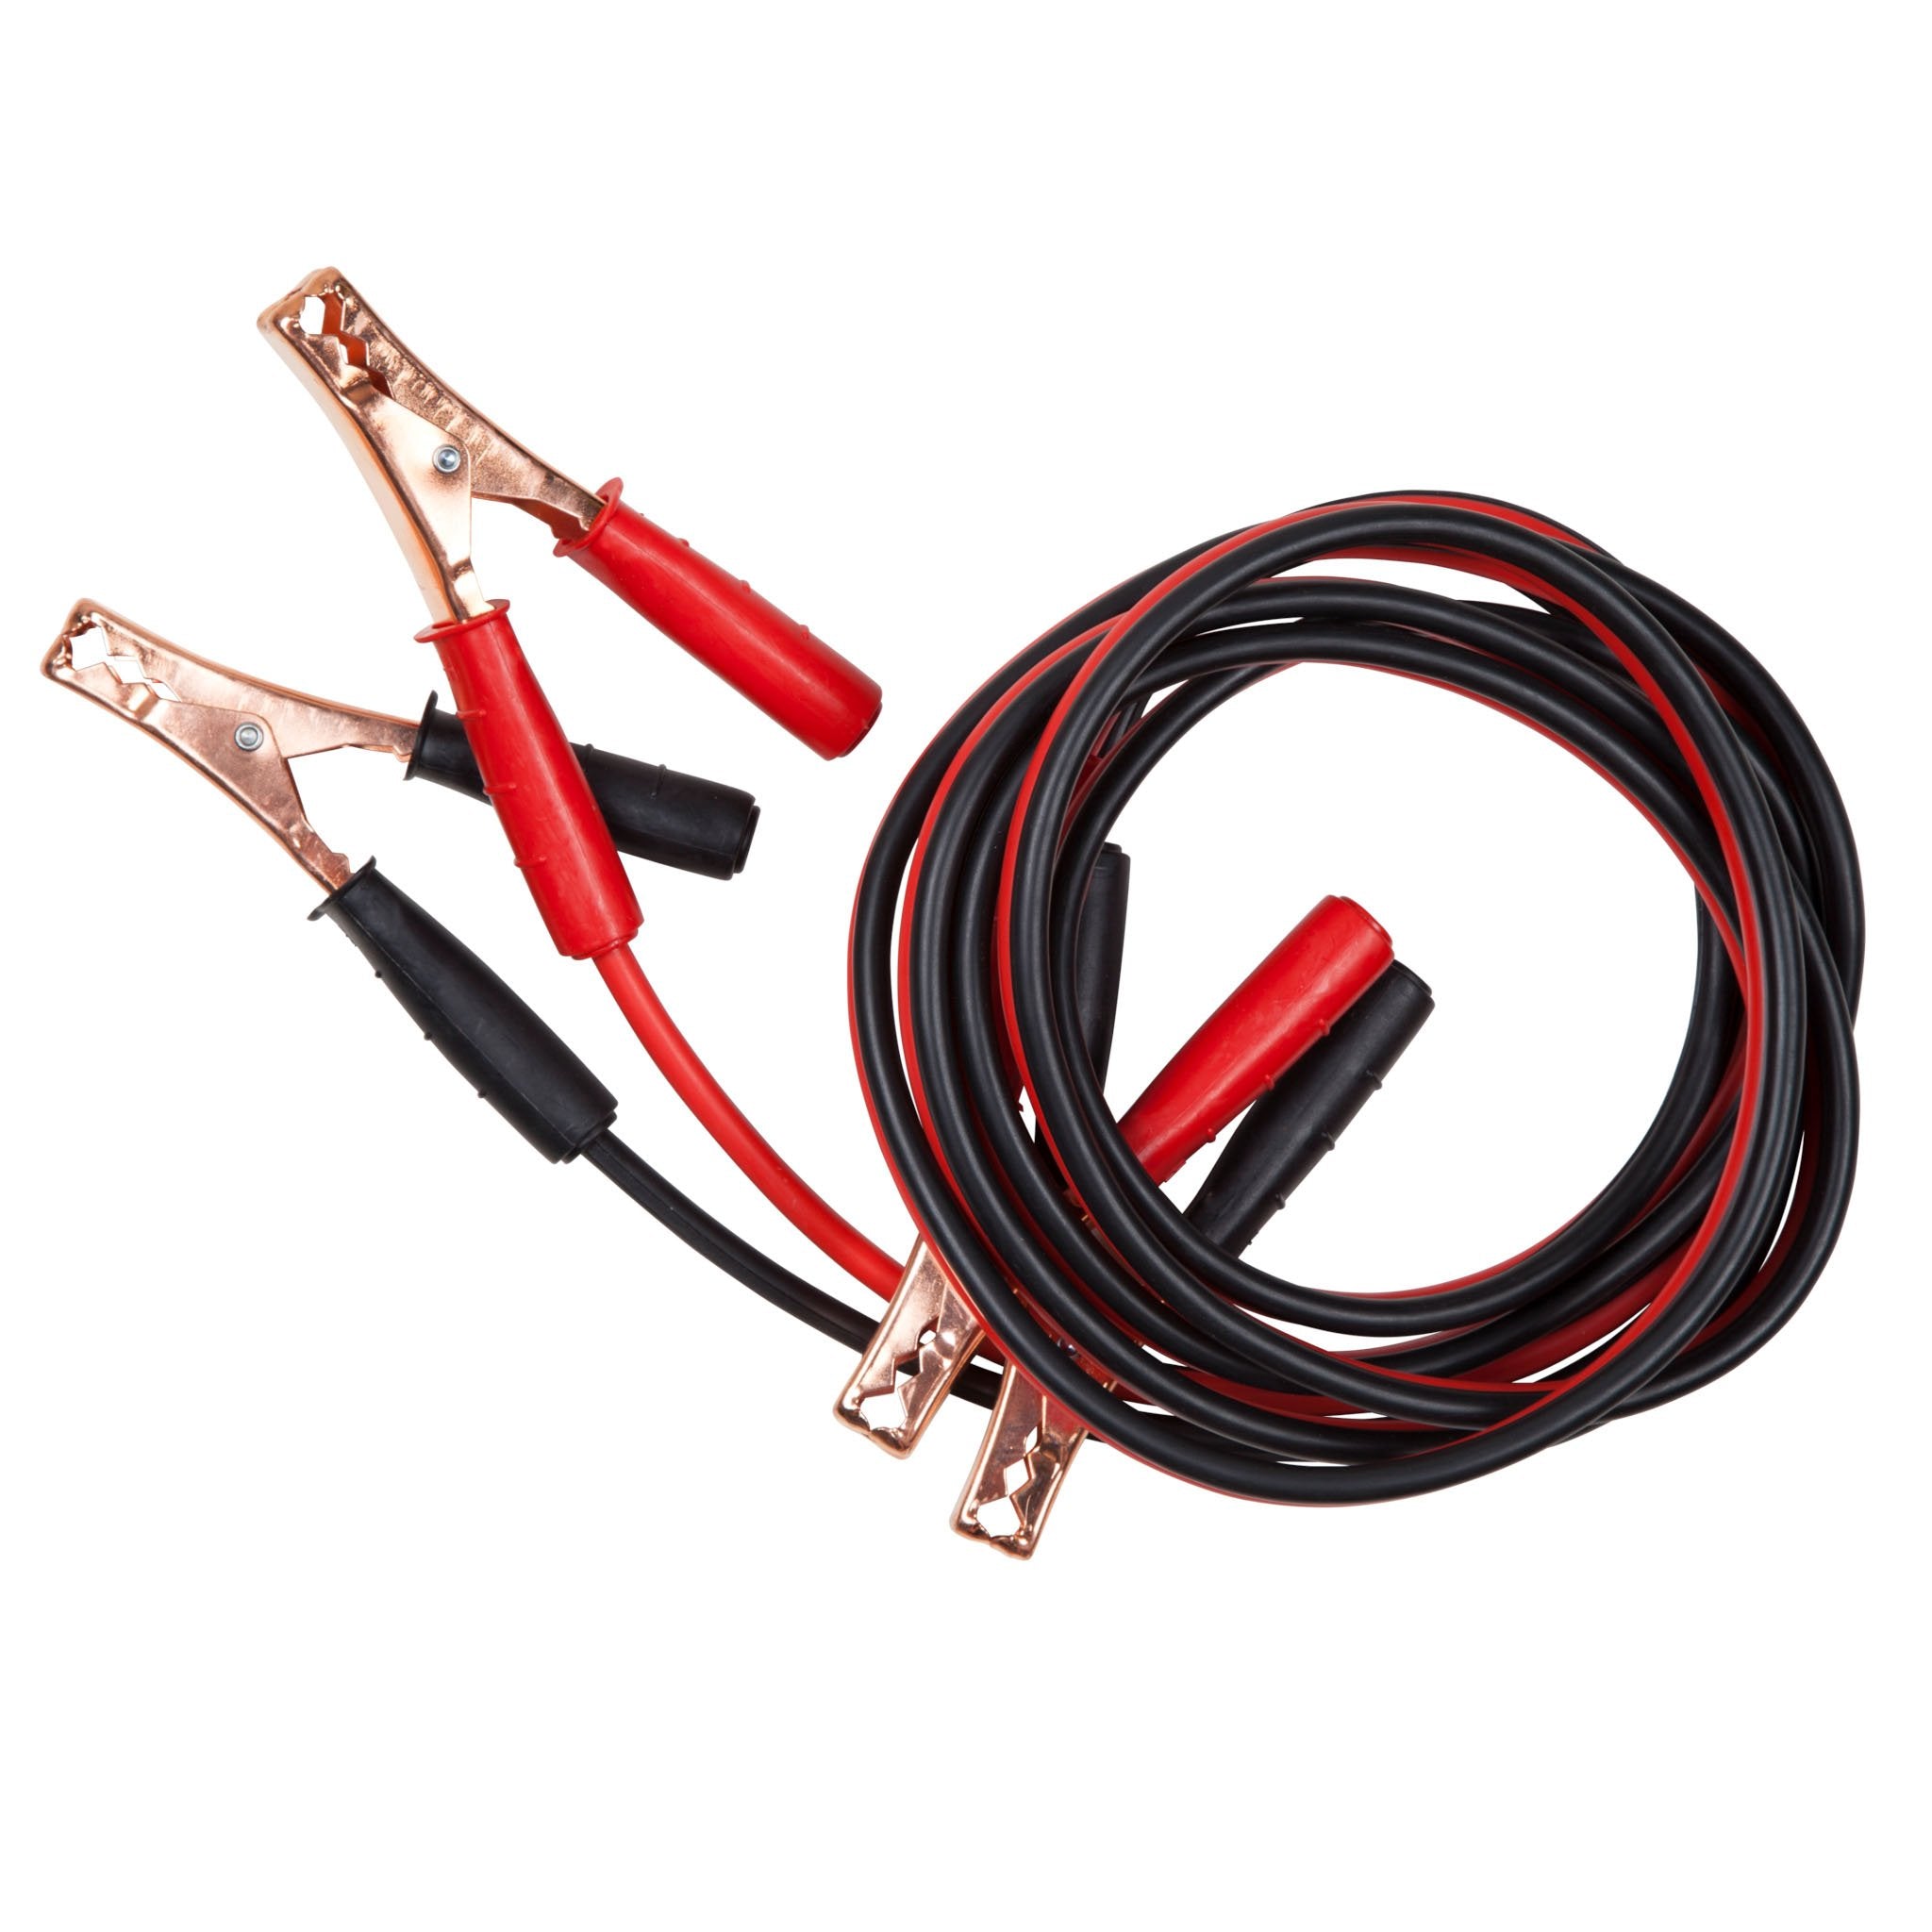 AAA 12'/8G Booster Cables